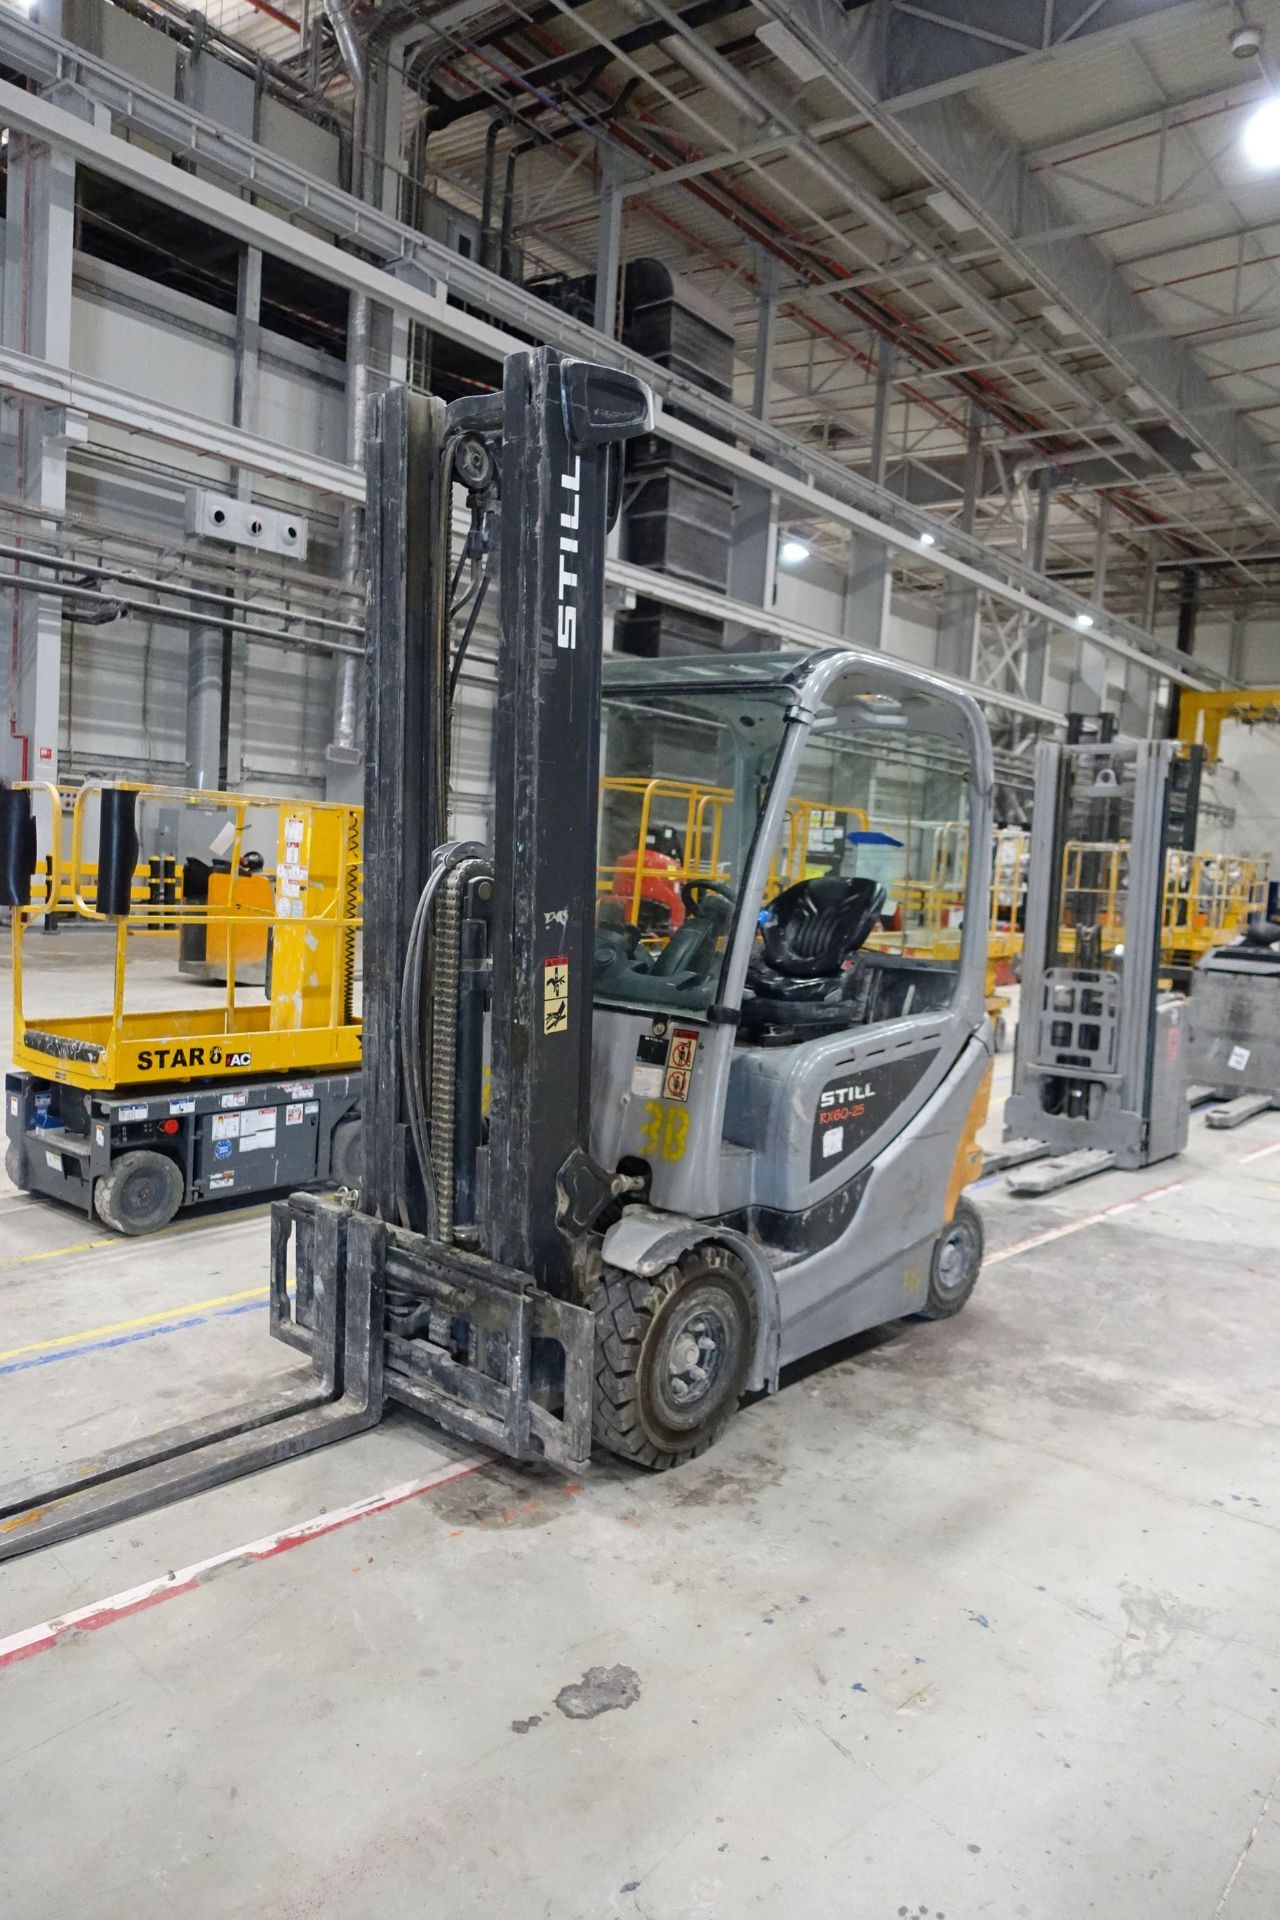 STILL RX60-25 Electric Forklift Truck, 2,500kg Capacity with Sideshift, Asset # 3000022, Ser #